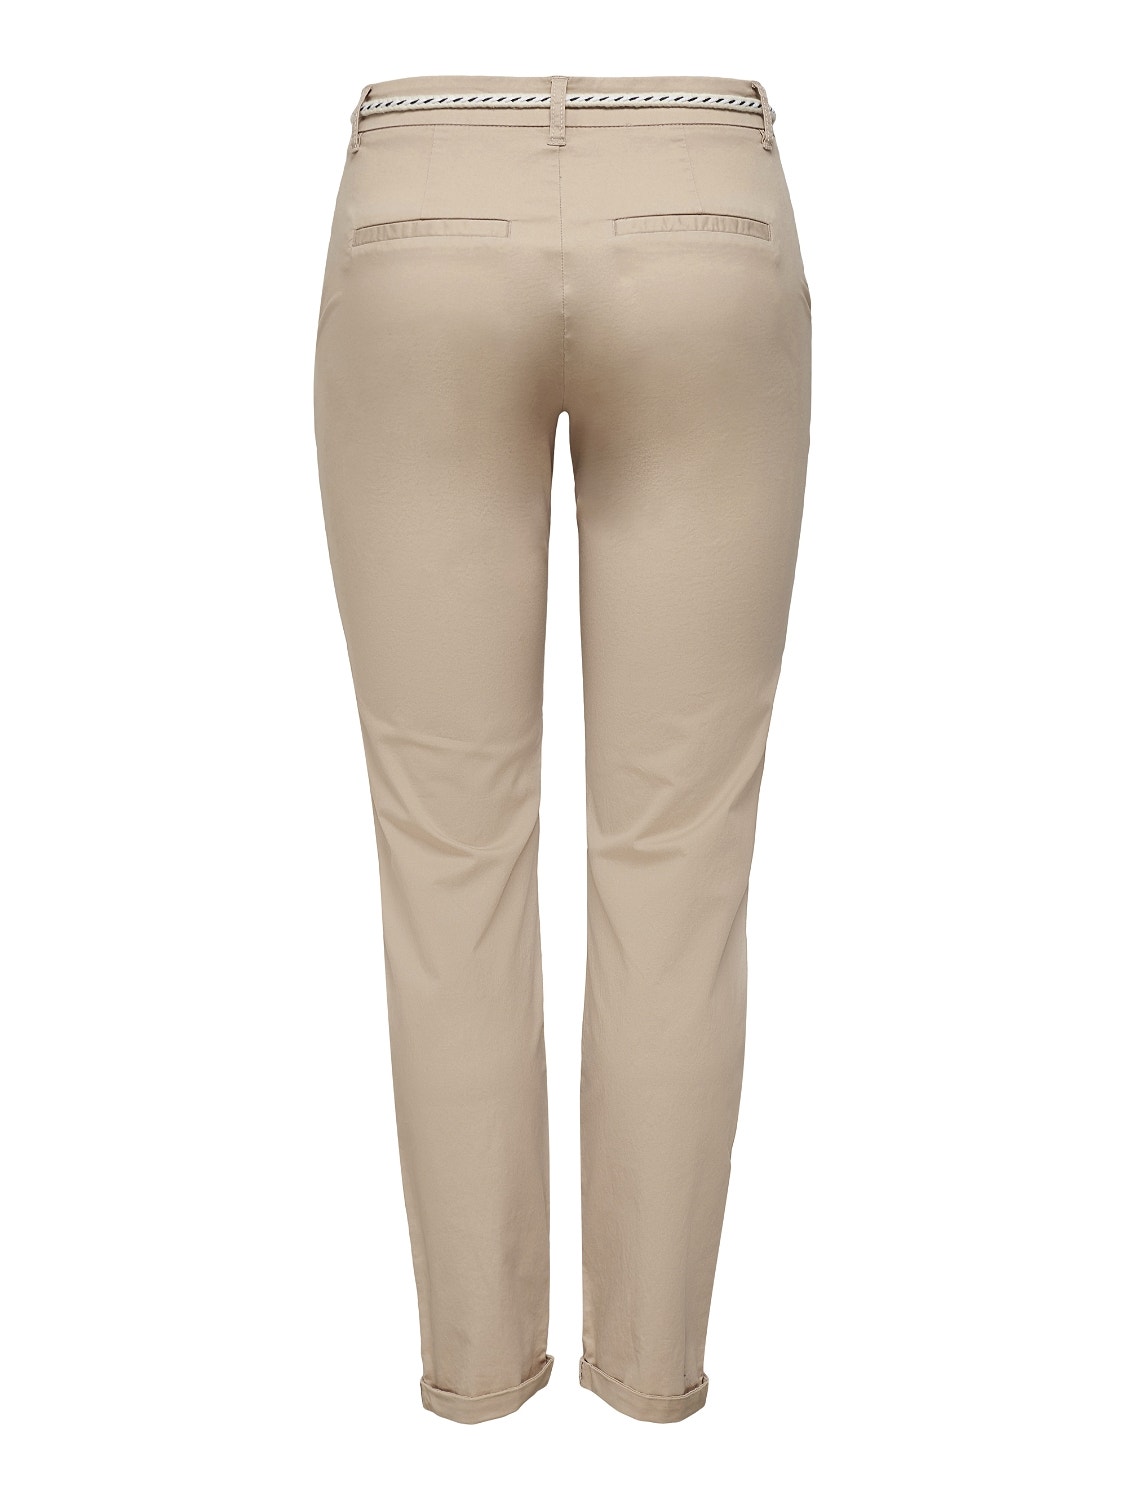 ONLY Normal geschnitten Mittlere Taille Hose -Rugby Tan - 15218519